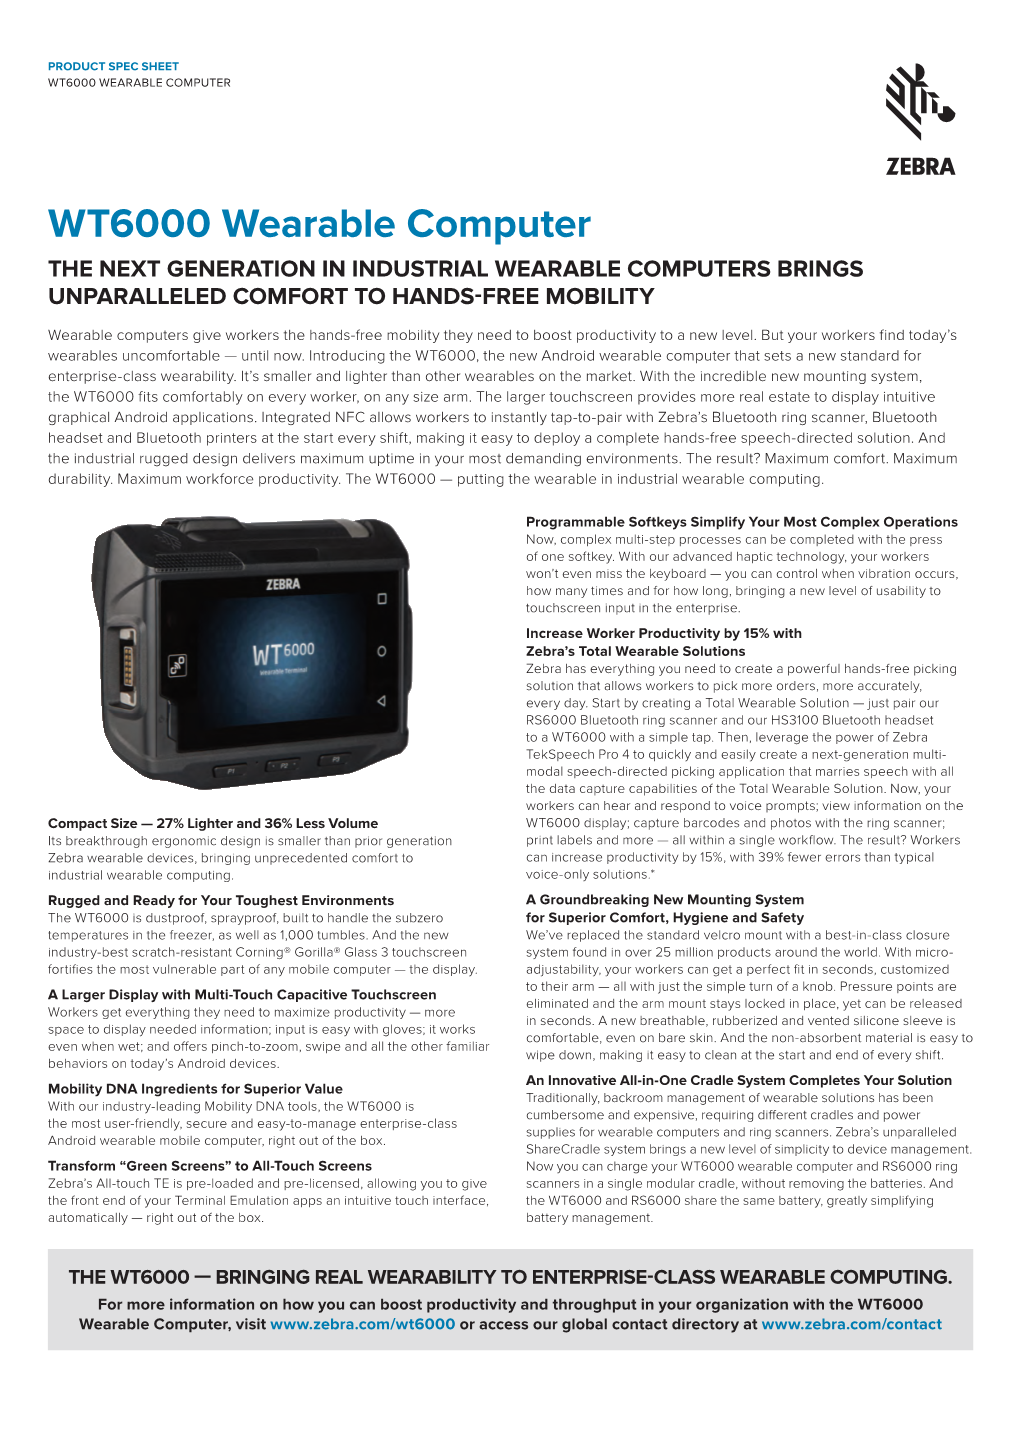 WT6000 Wearable Computer Specification Sheet